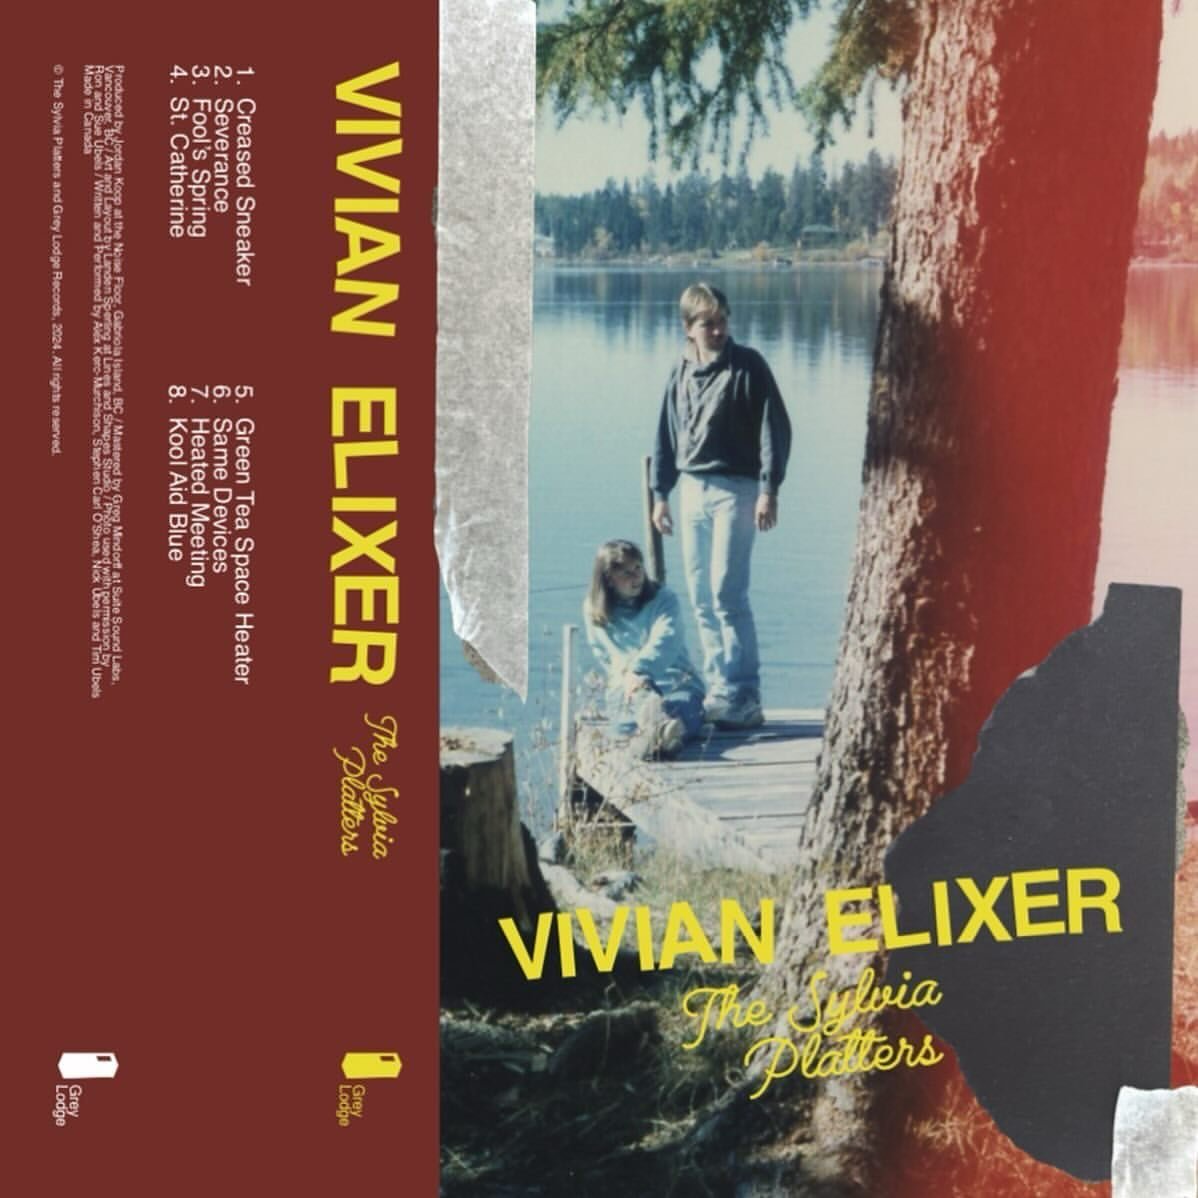 Repost @thesylviaplatters Enjoy the refreshing sounds of VIVIAN ELIXIR 🍹

Ah, sweet relief! Savour an intoxicating blend of janglepop and shoegaze shot through with a dash of melancholic rumination to cut the sweetness. The Sylvia Platters&rsquo; la